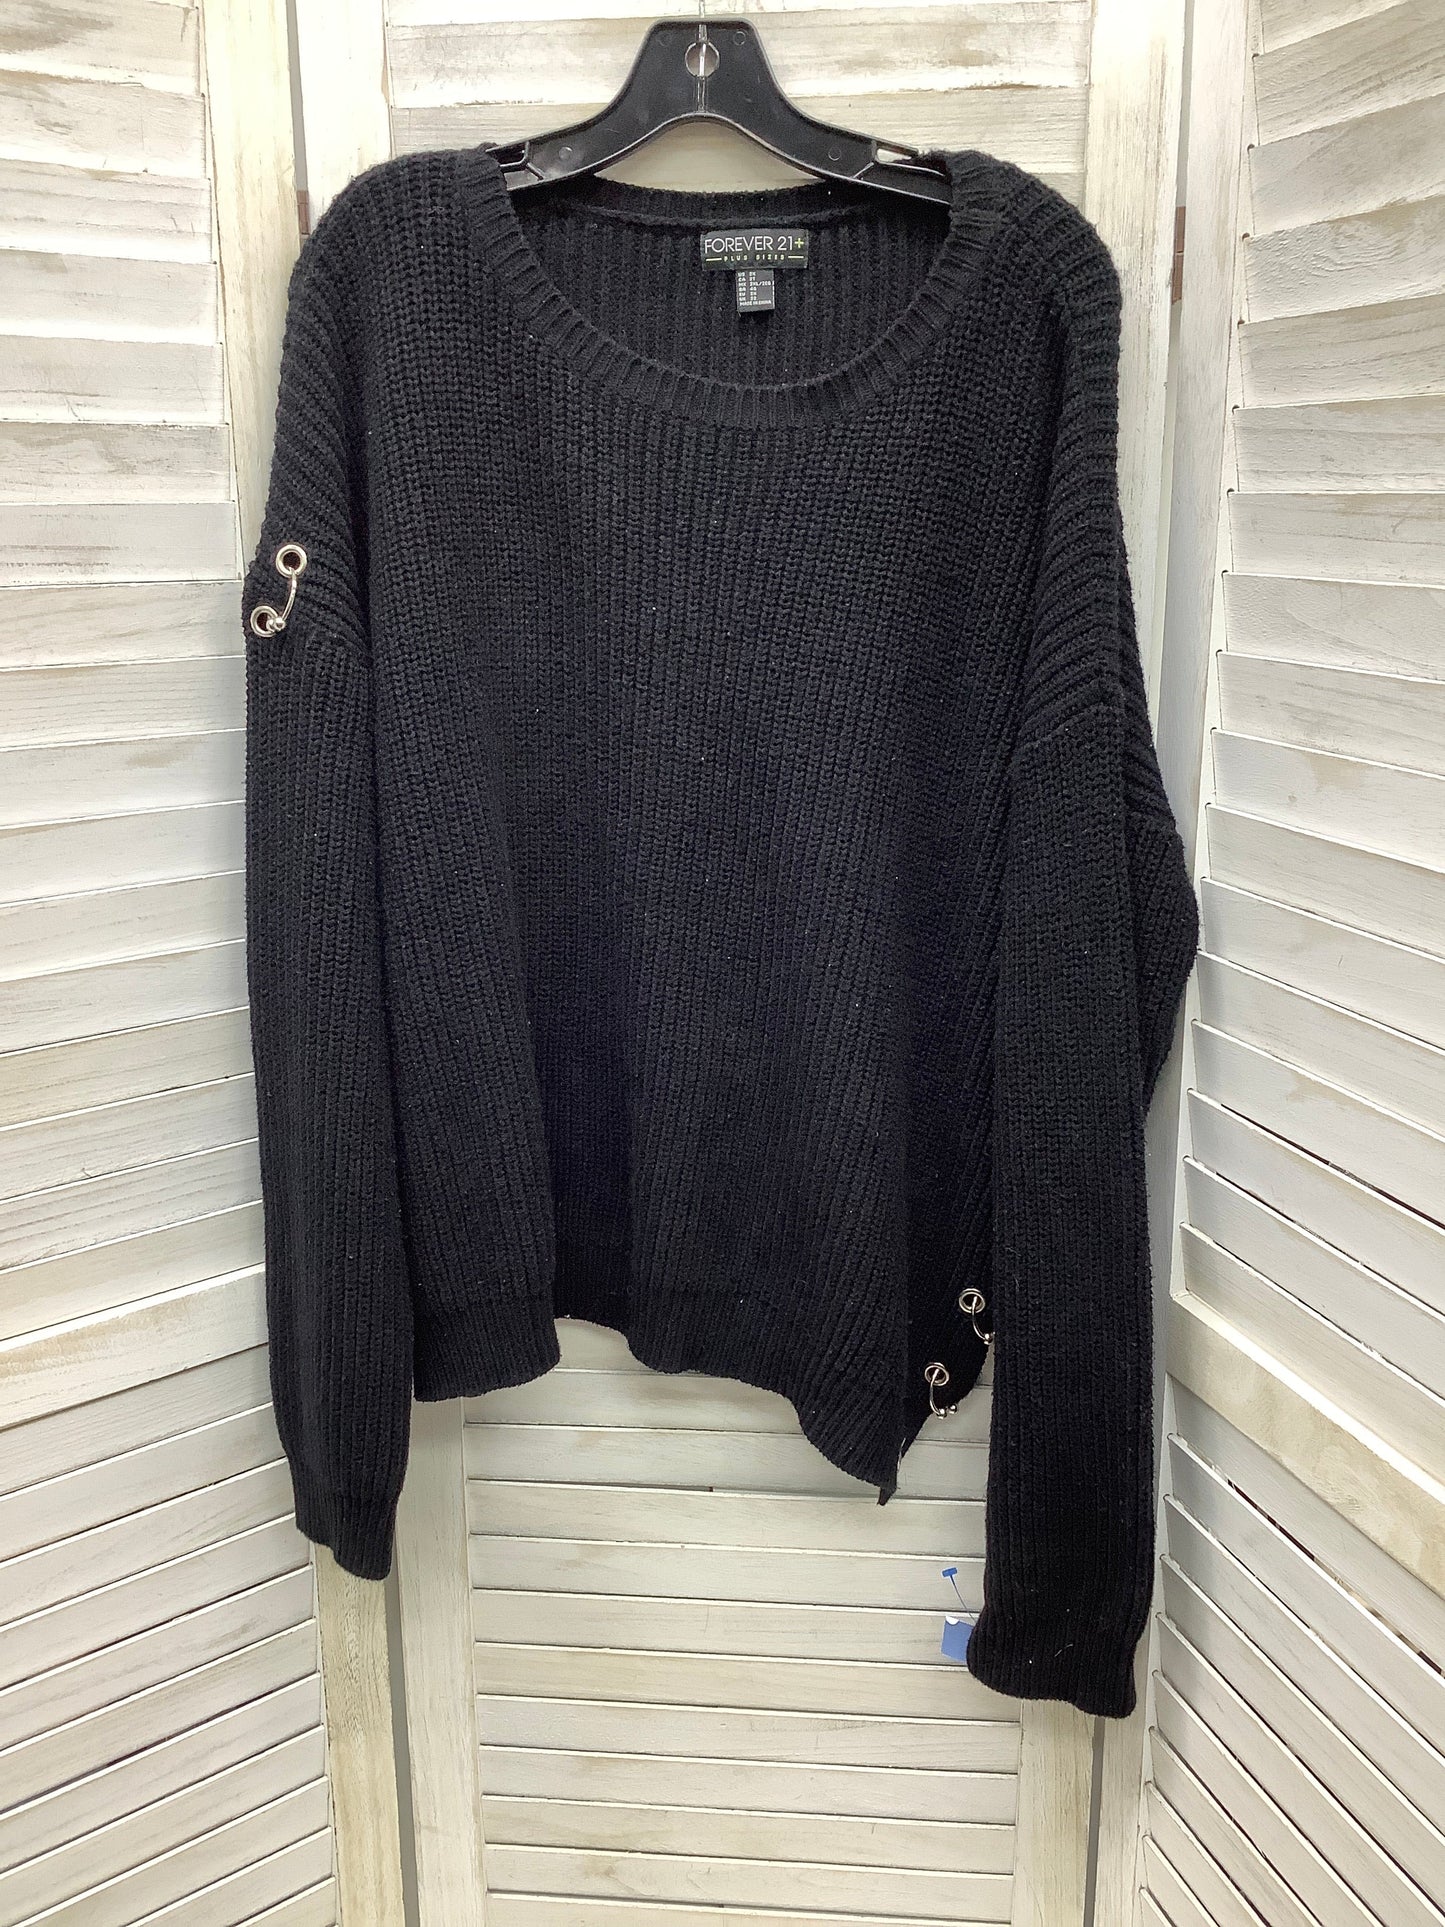 Sweater By Forever 21  Size: 2x